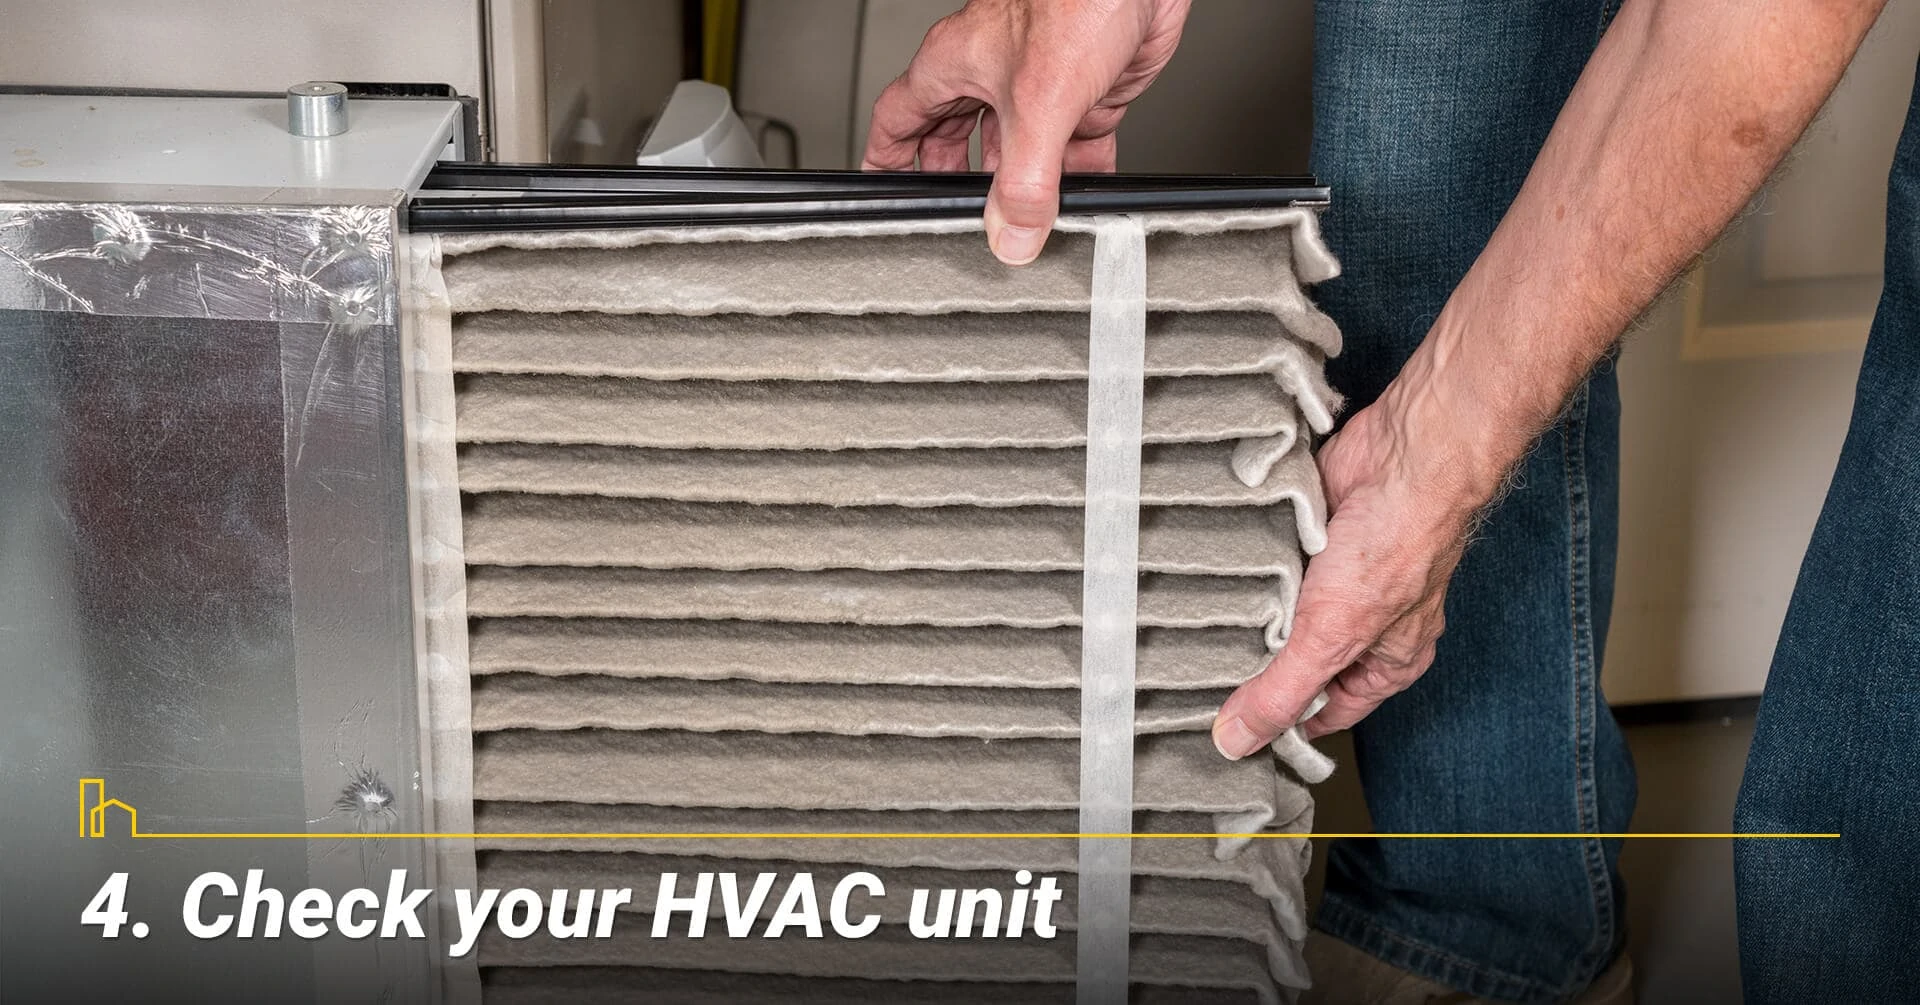 Check your HVAC unit, change your air filter